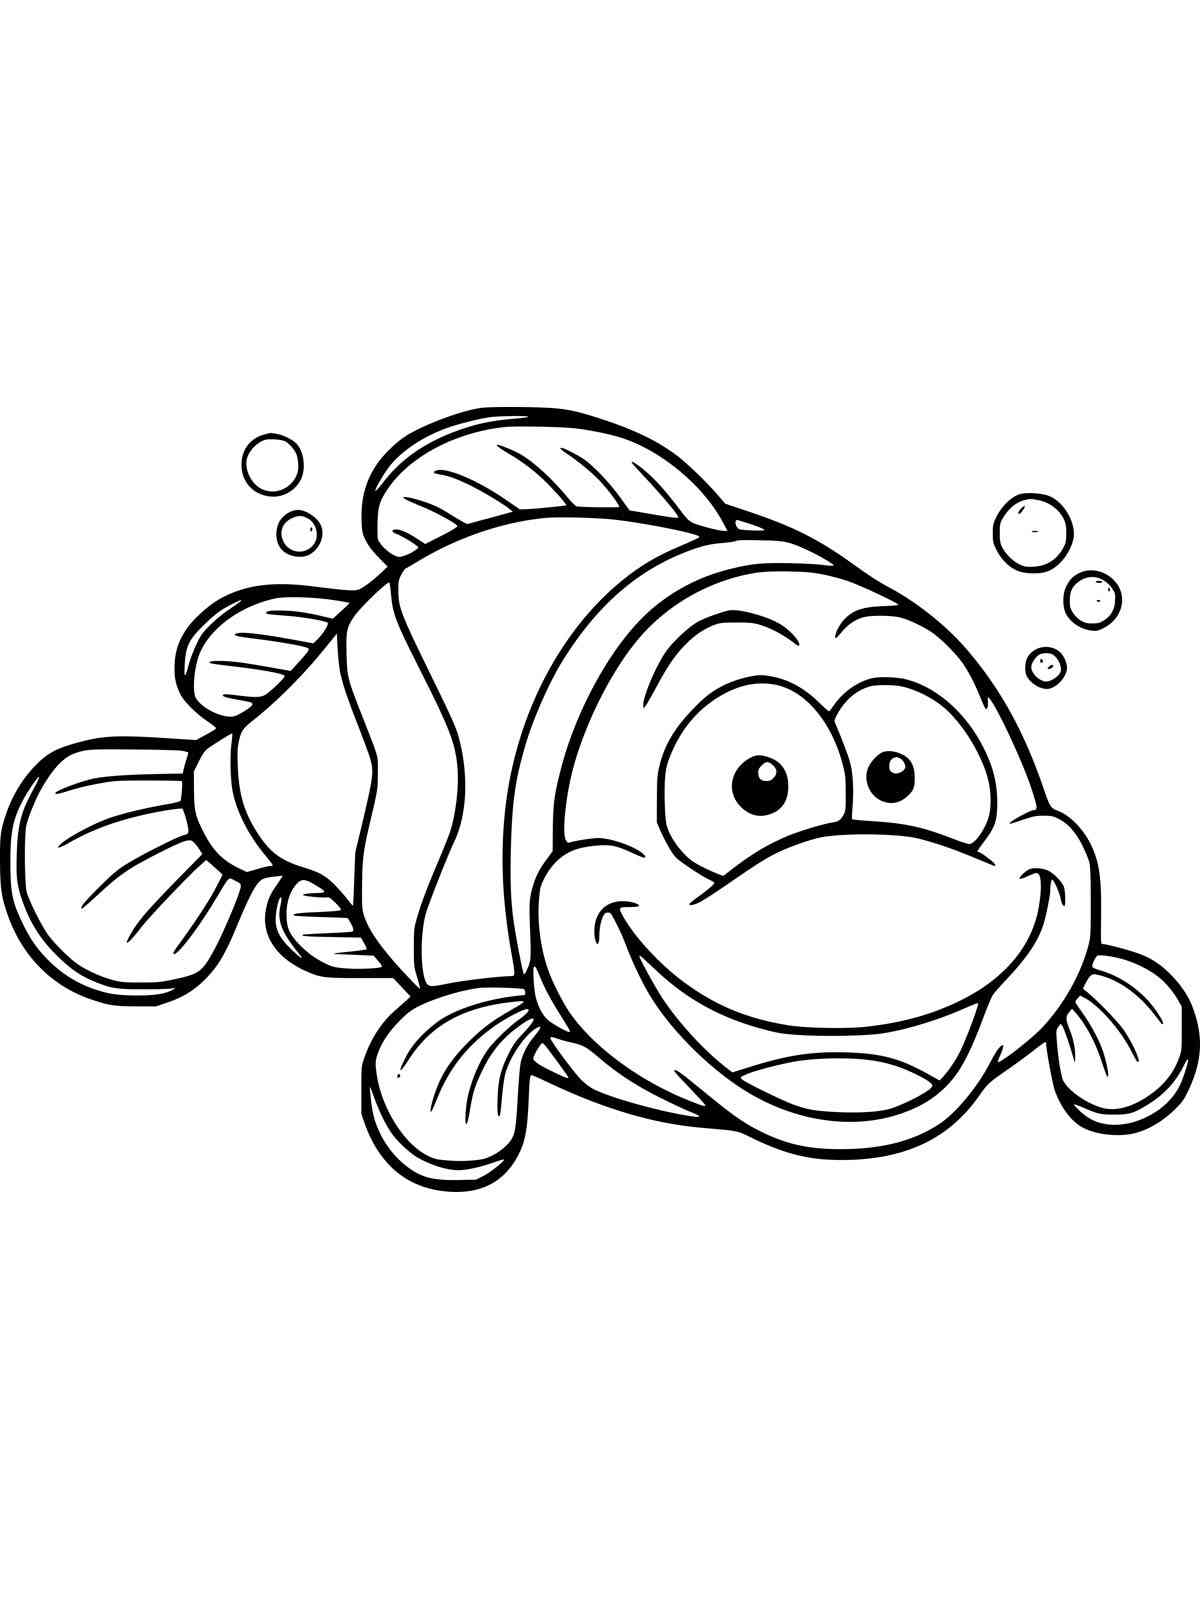 Clownfish smiling coloring page